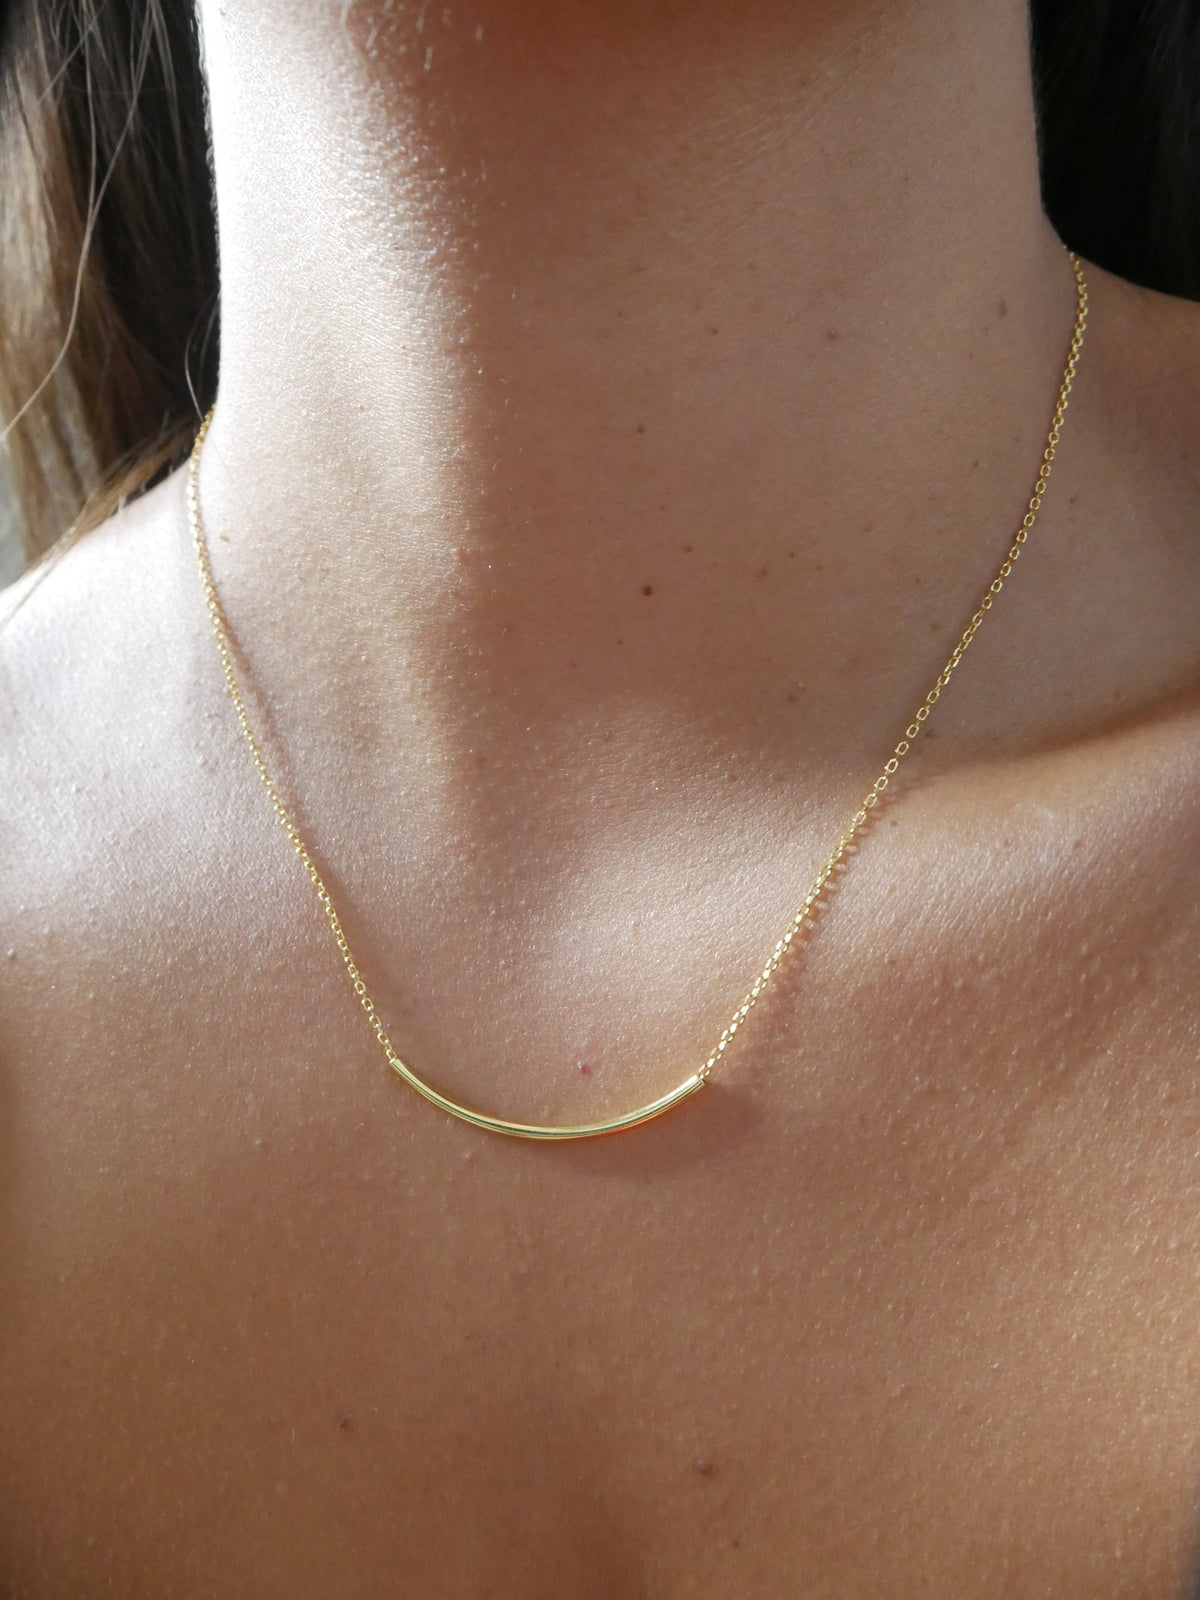 dainty gold necklace bar u shape waterproof everyday necklaces that wont tarnish or turn green influencer style necklaces trending on instagram shops and tiktok cute jewelry store unique for everyday gift ideas inexpensive jewelry store in Miami Brickell good quality jewelry Kesley Boutique